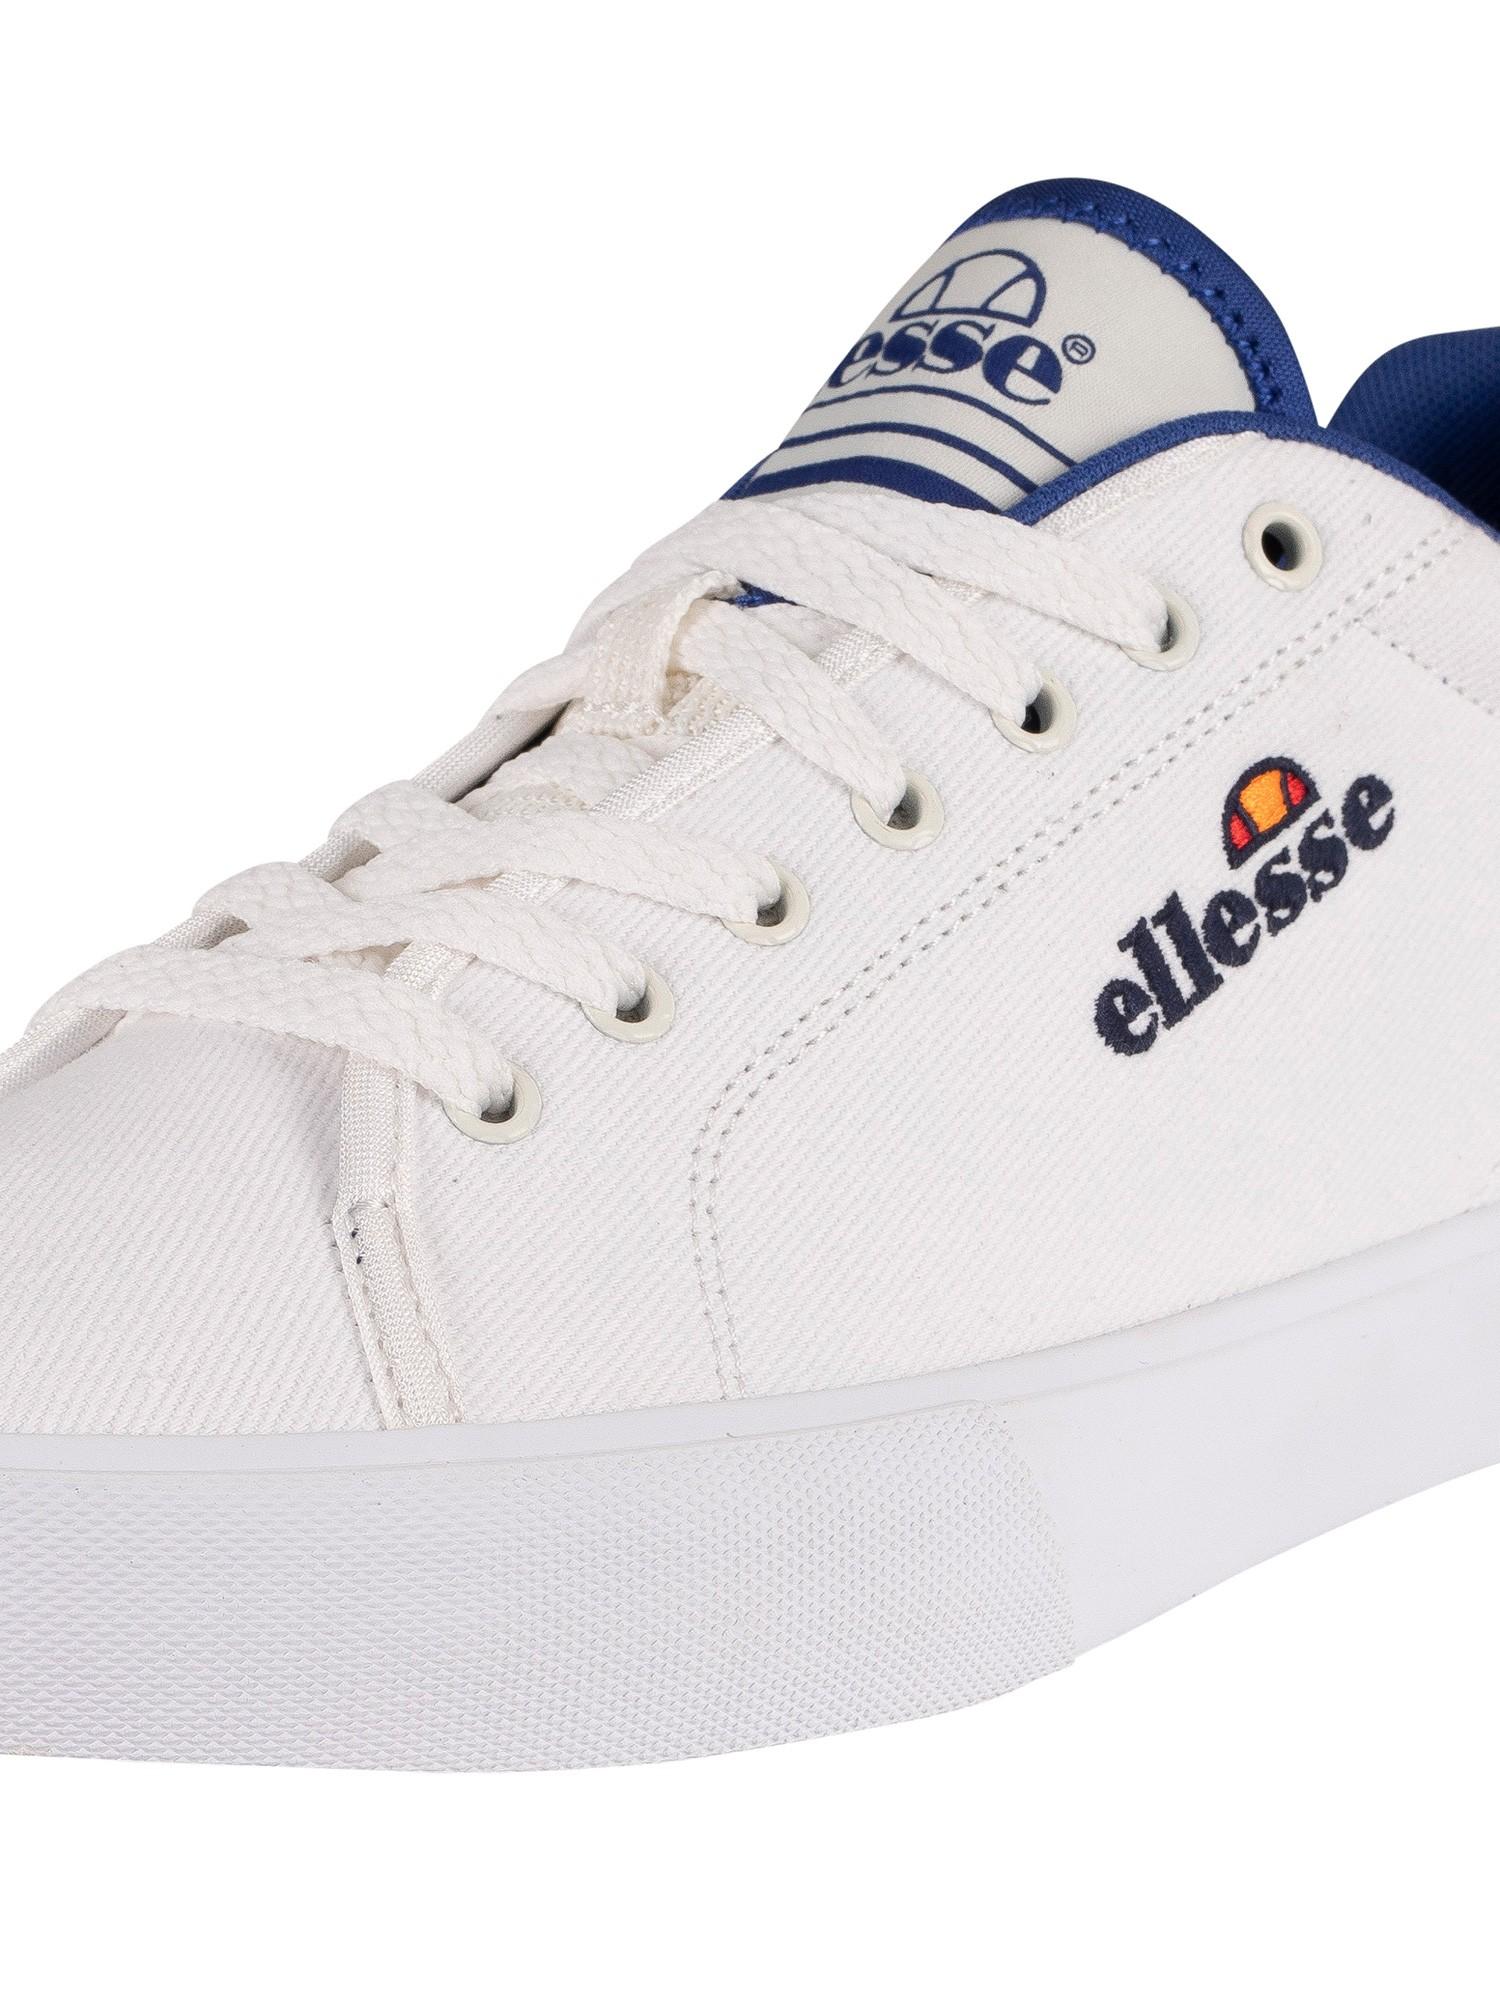 Ellesse Taggia Text Canvas Trainers in White/Dark Blue (White) for Men -  Lyst